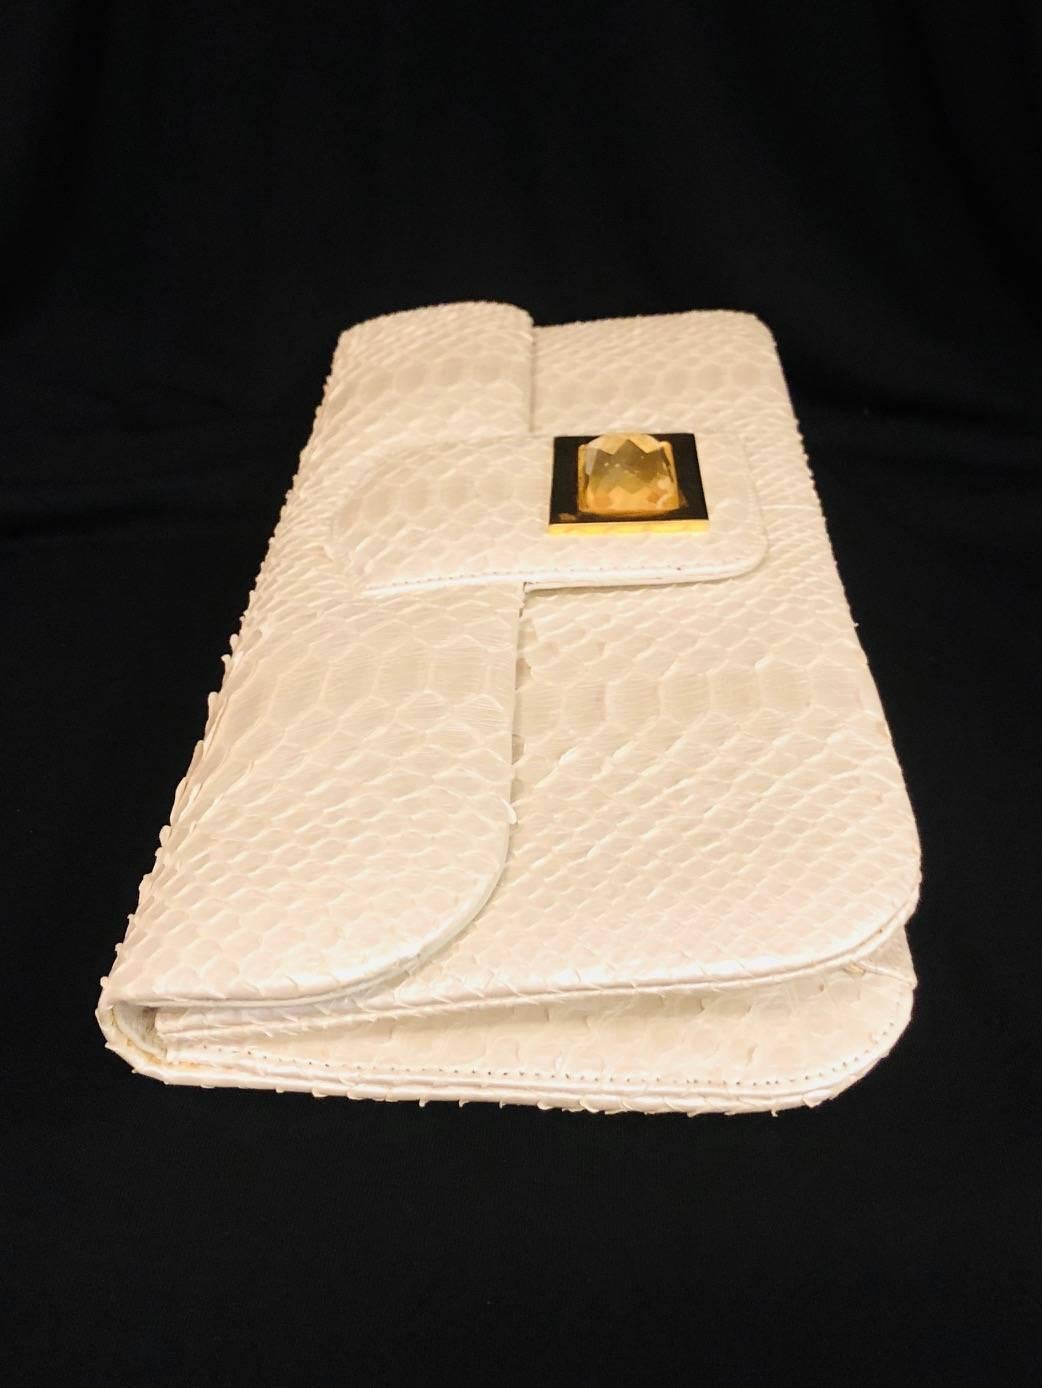 Women's Kara Ross Collectible Ivory Python Clutch With Rock Crystal Embellishment 